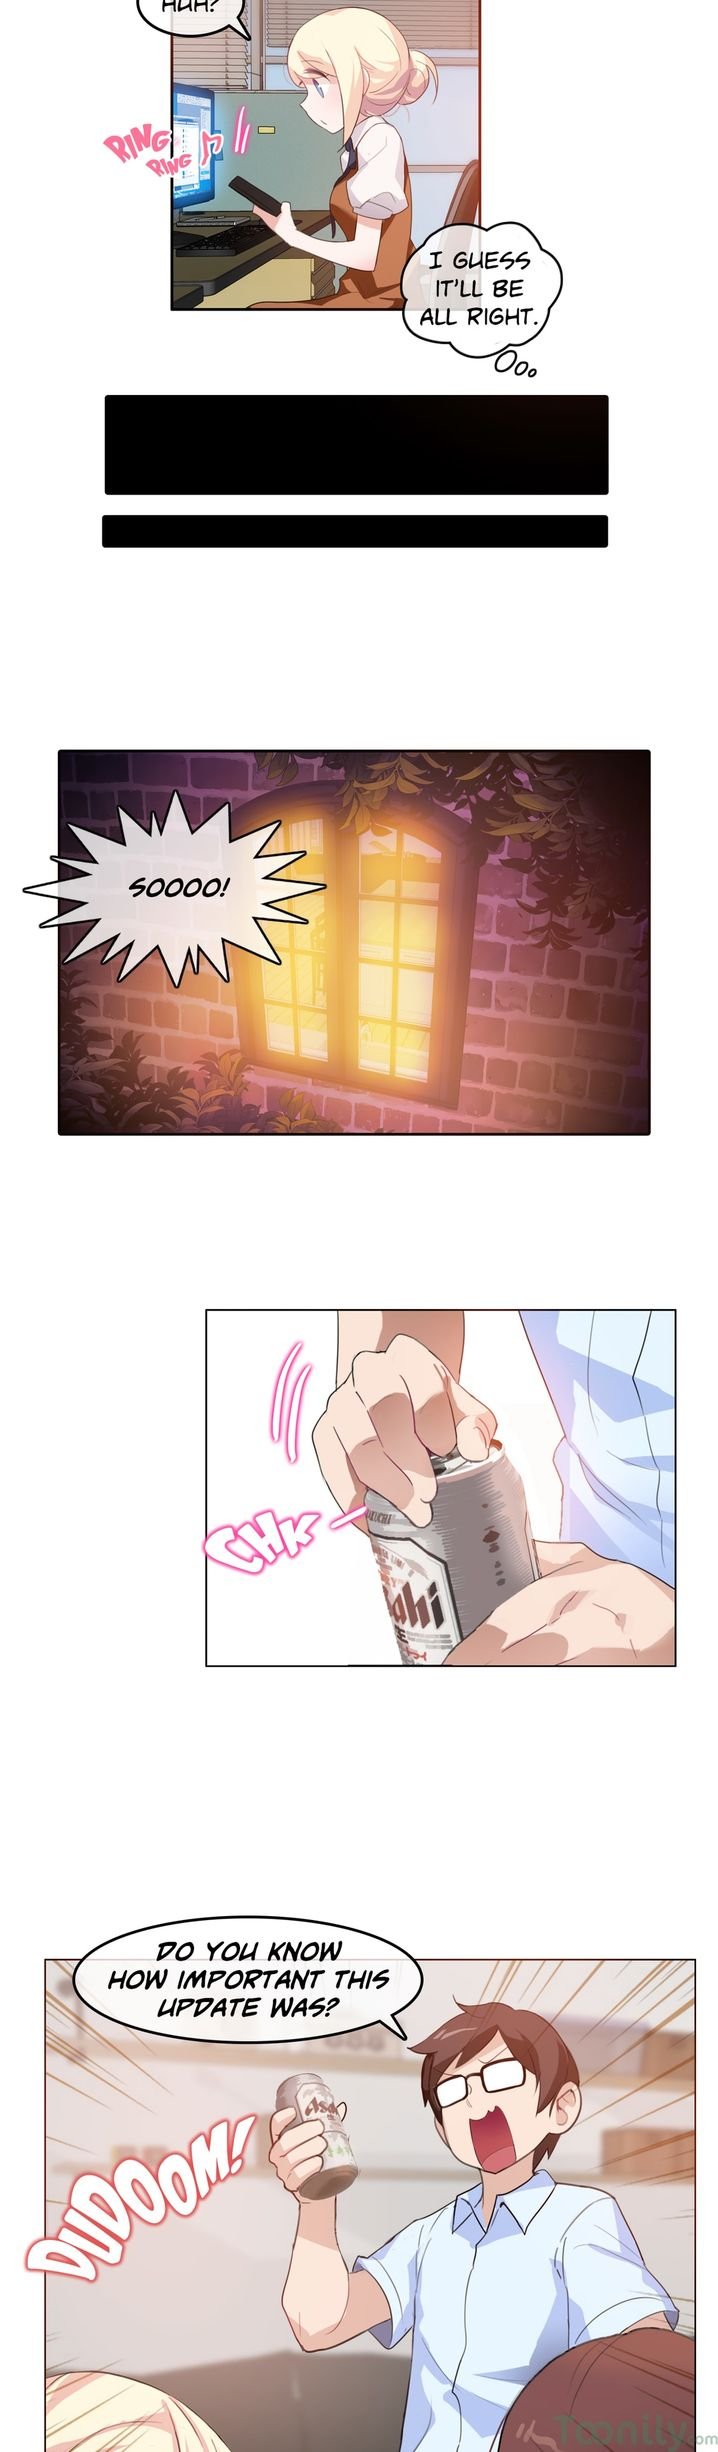 a-perverts-daily-life-chap-9-4